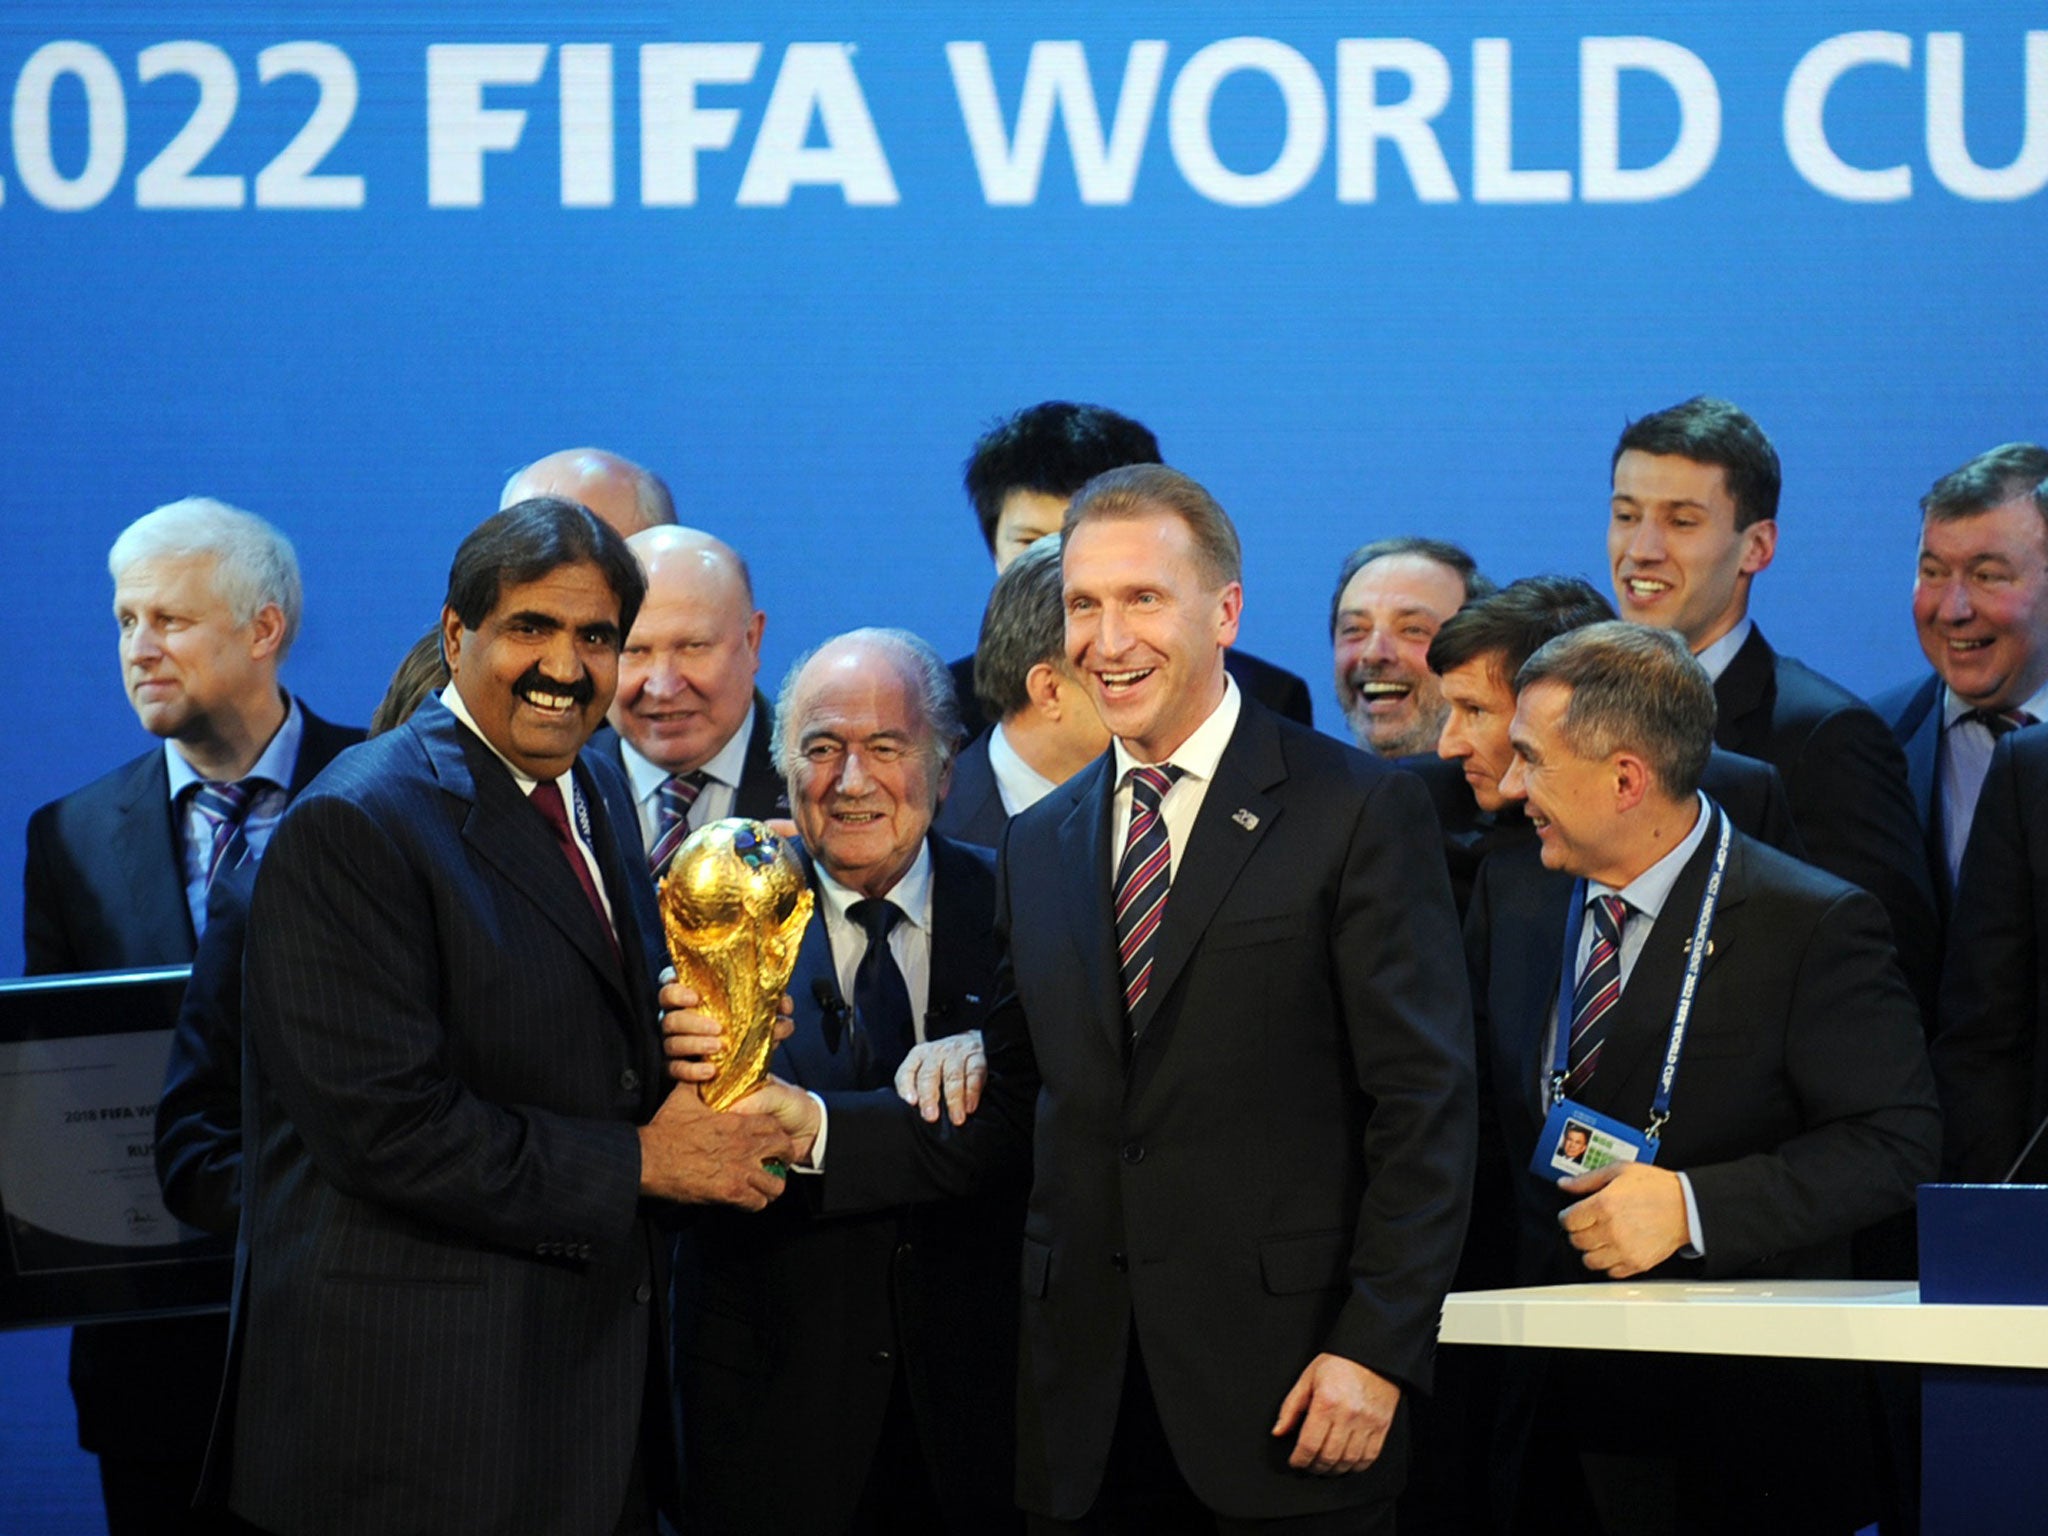 Former Fifa executive says he was offered large bribe for 2018 World Cup  vote, Fifa